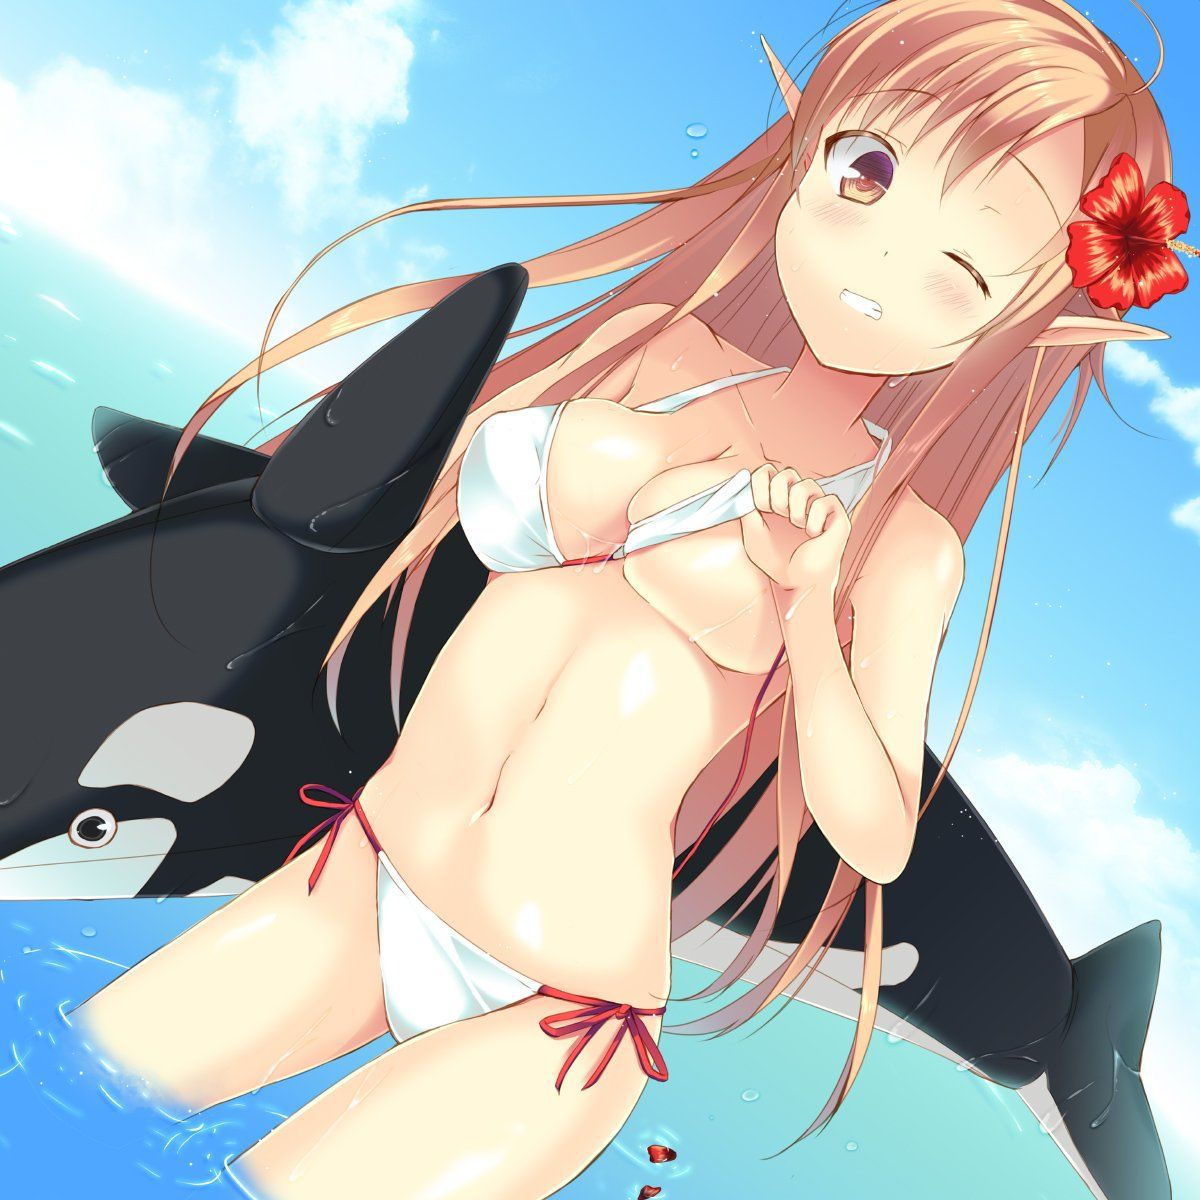 Erotic image that can be pulled out just by imagining asuna's masturbation figure [Sword Art Online] 38